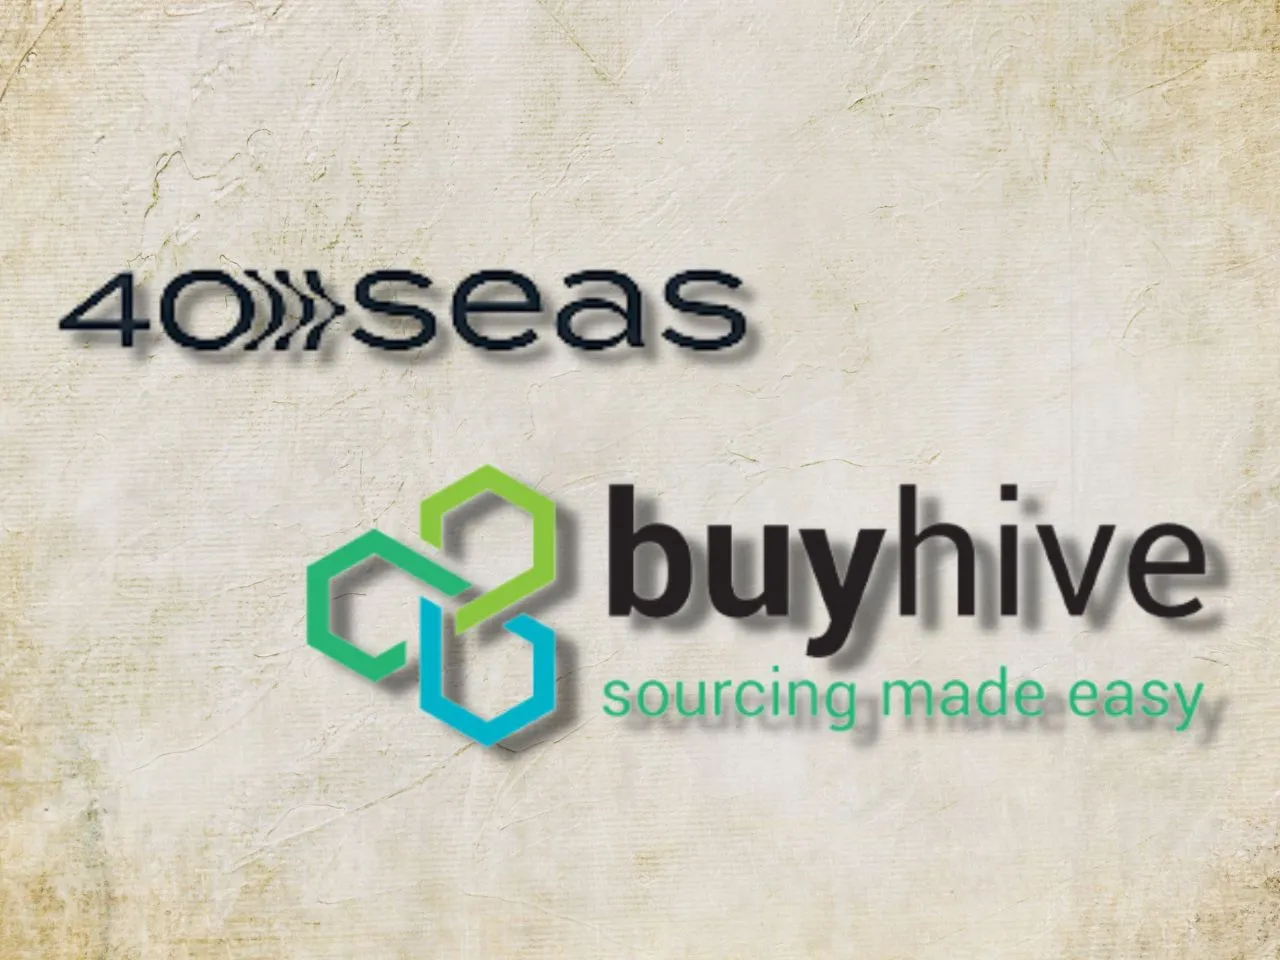 BuyHive Teams Up With 40Seas For Cross-Border B2B Financing for SMEs